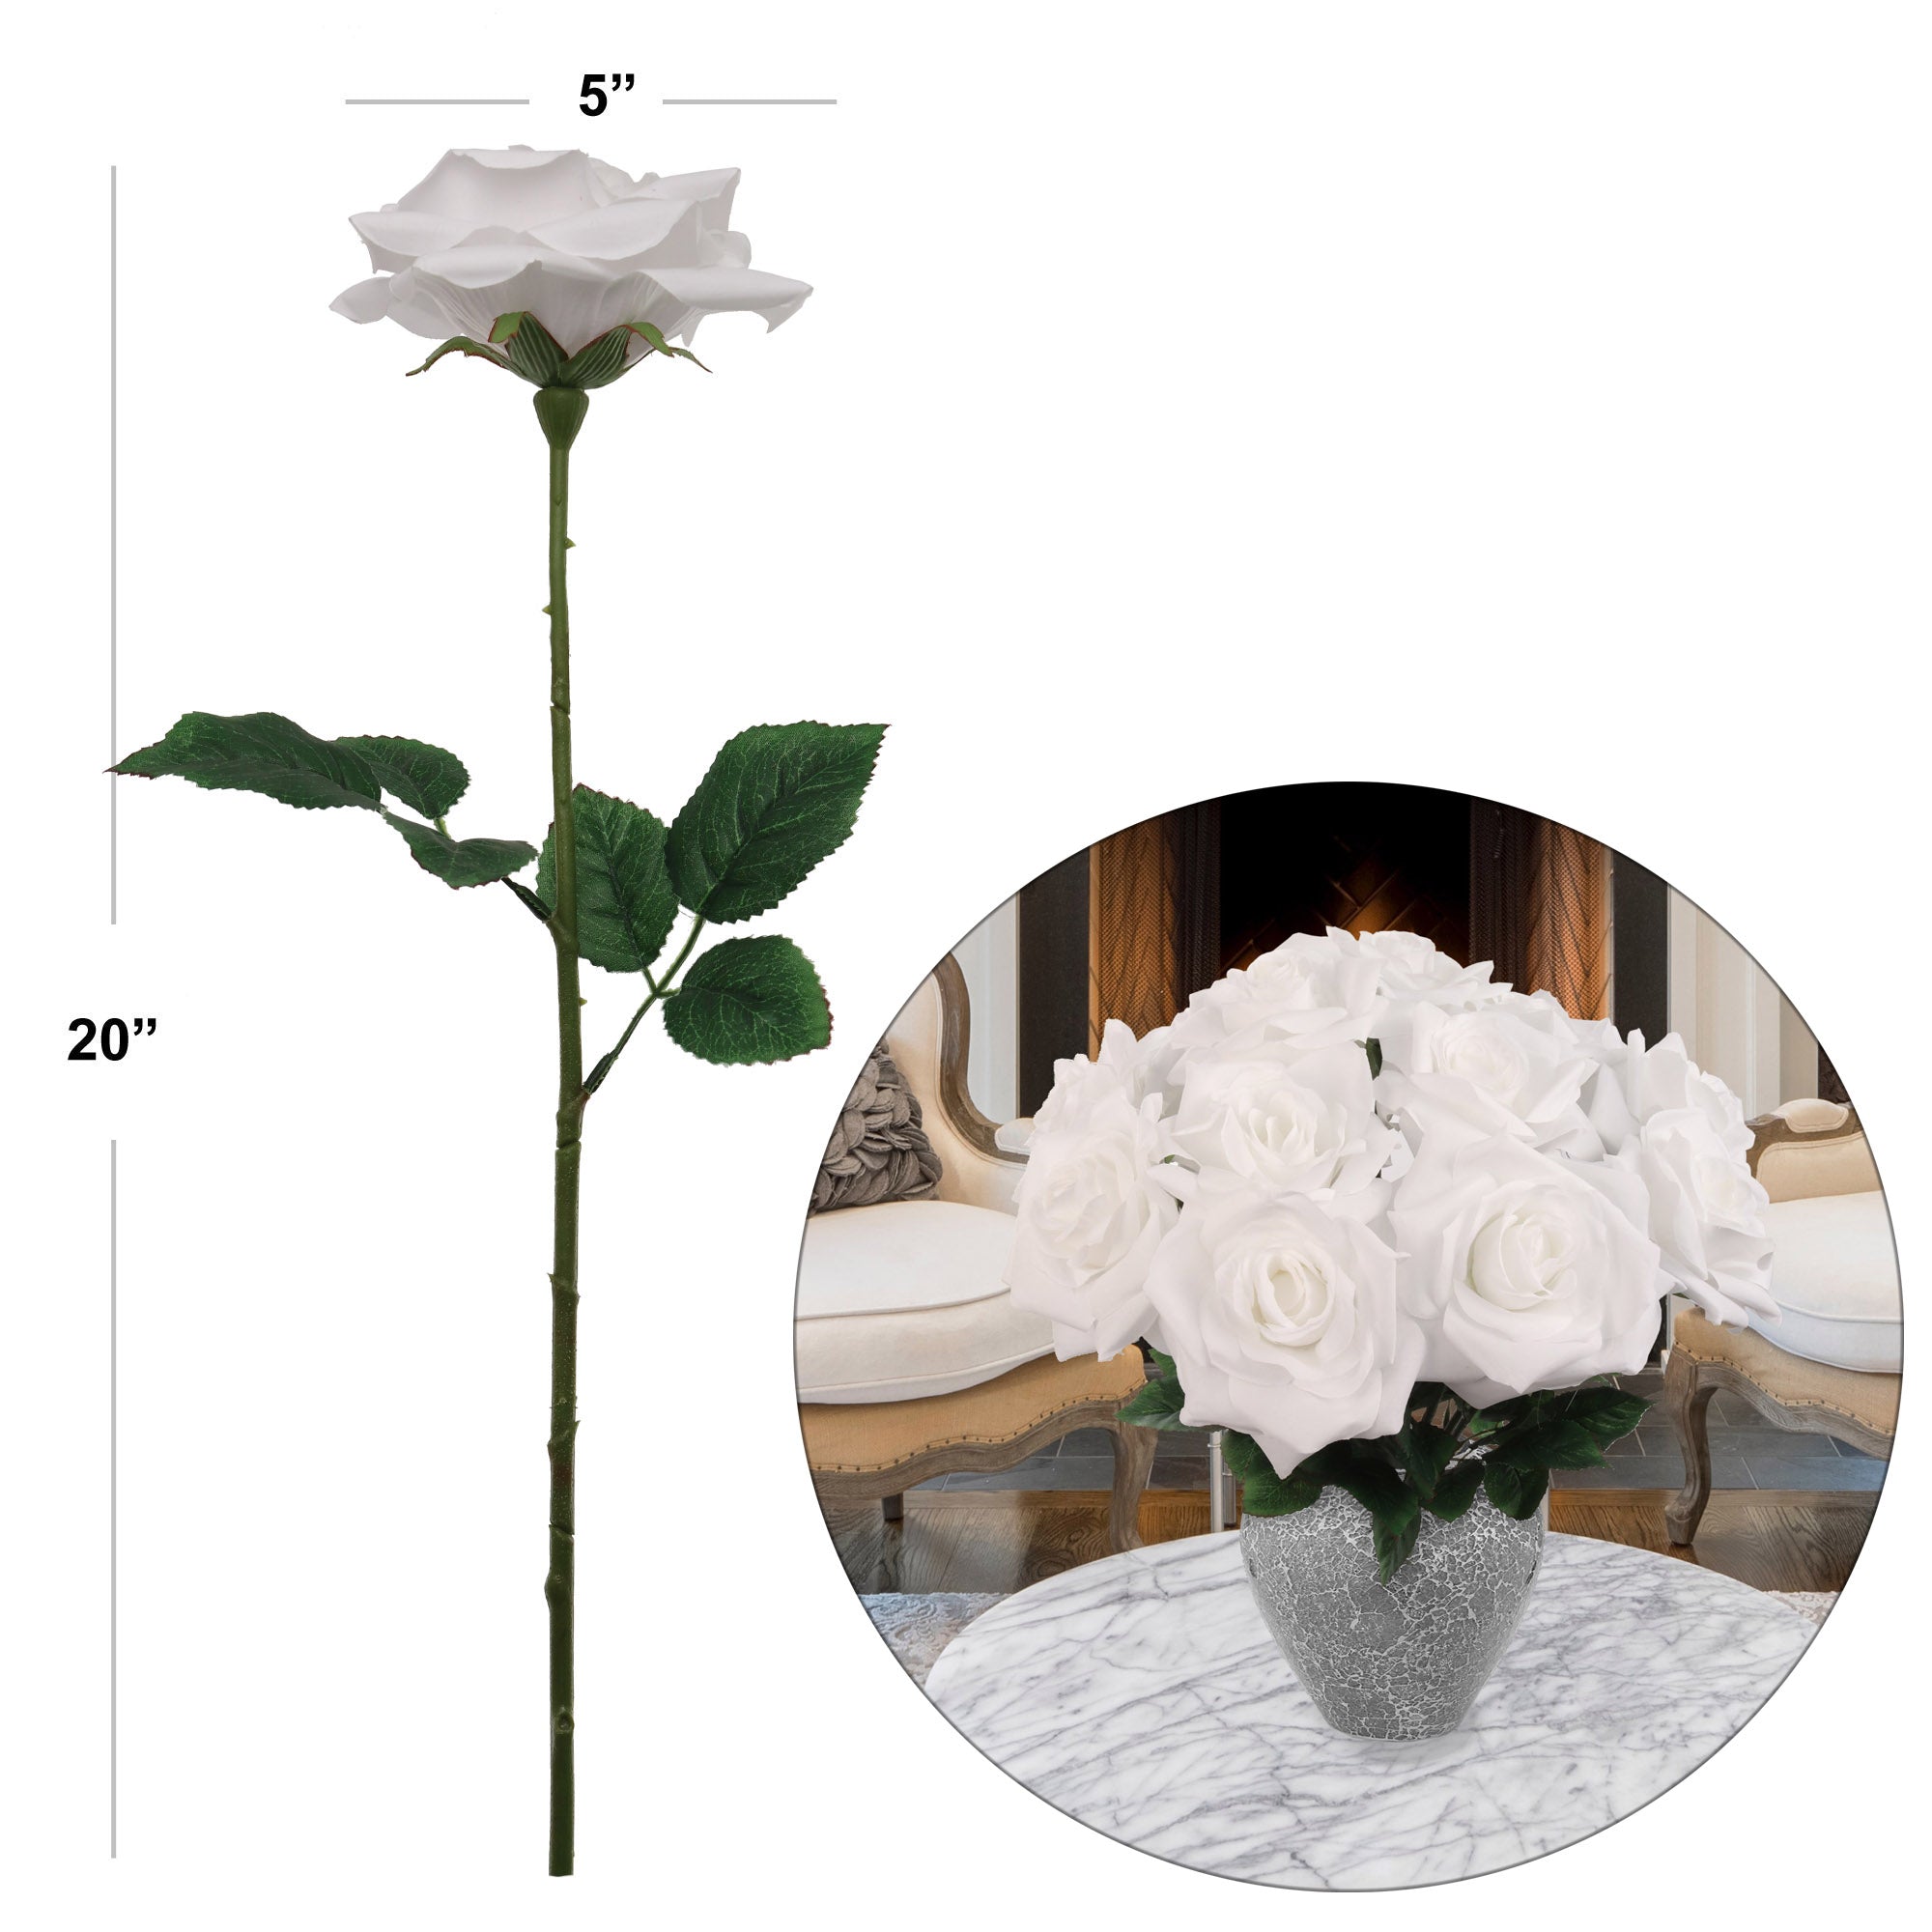 5" White Open Rose with 20" Stem - Lifelike Artificial Flower for Home Decor, Weddings, and DIY Arrangements